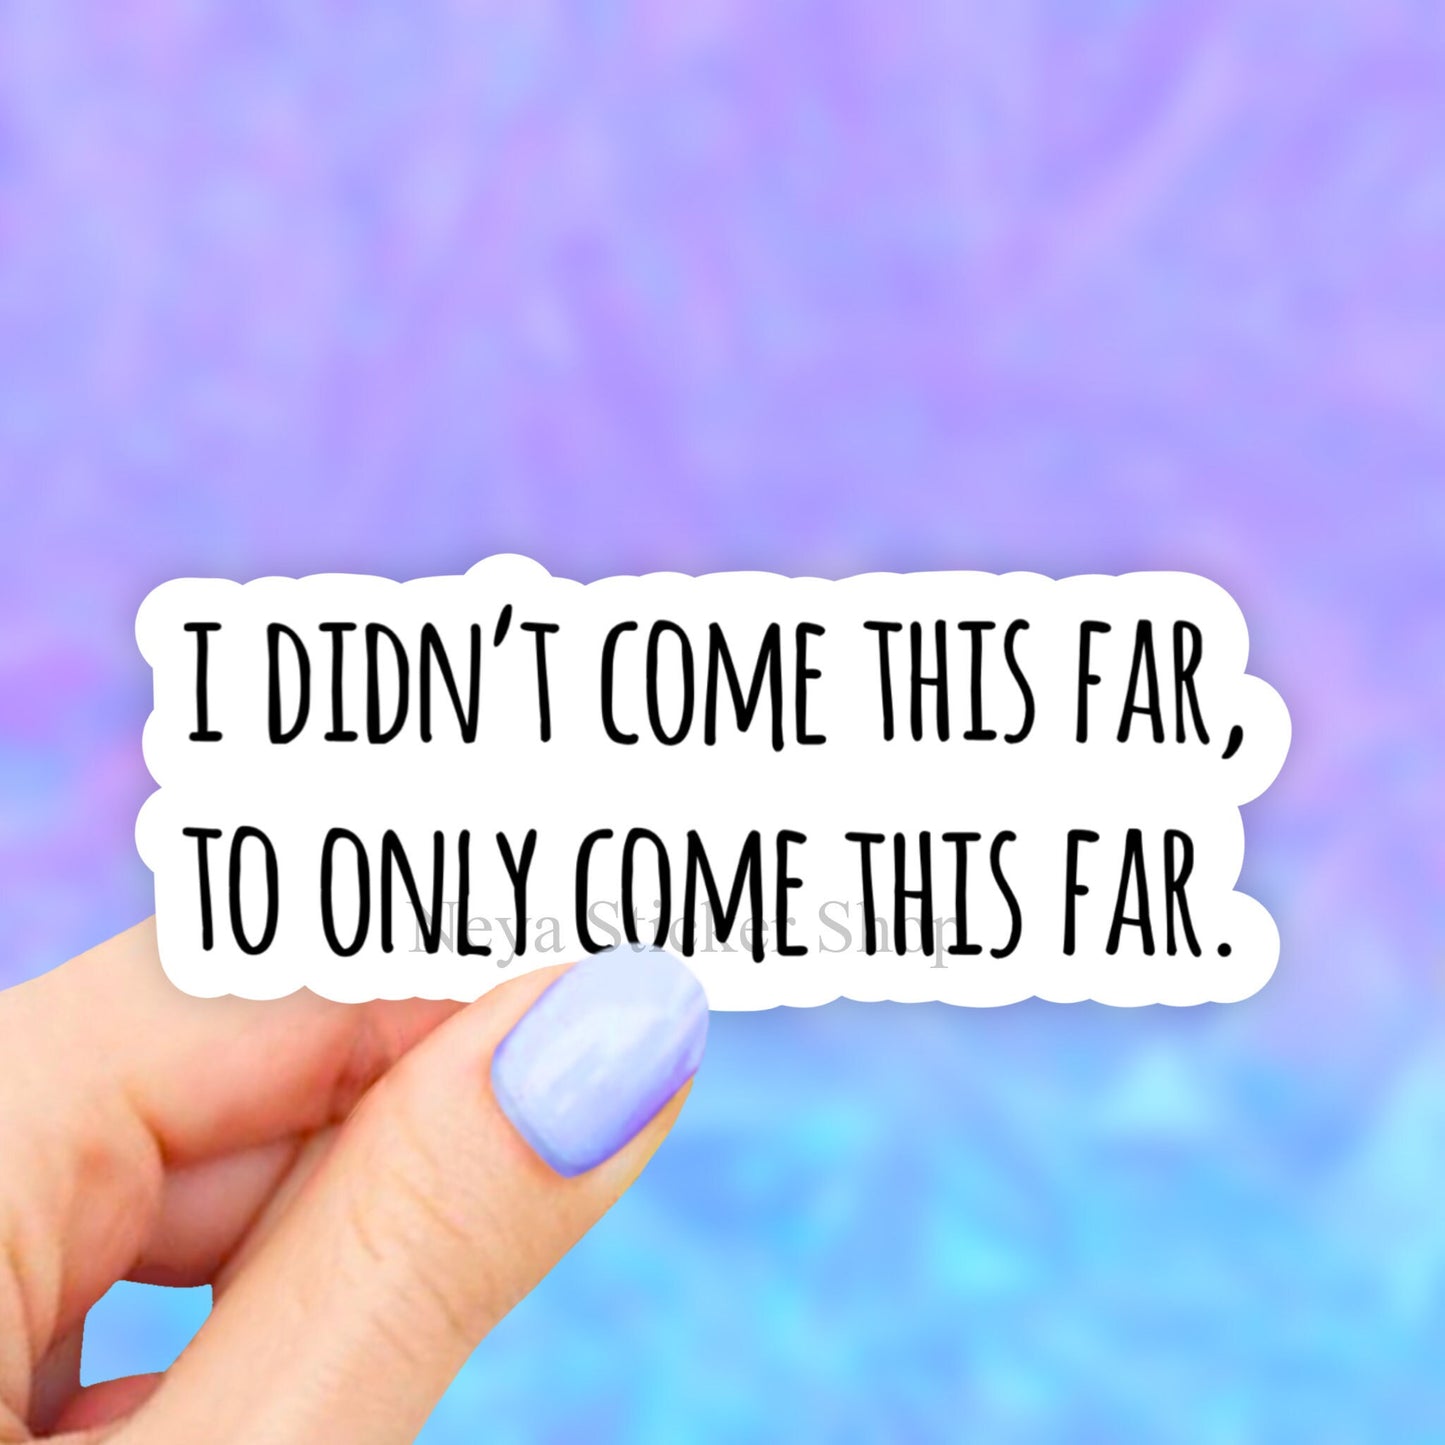 I Didn't Come This Far To Only Come This Far Sticker, Motivational Quotes Sticker, Aesthetic Sticker, Laptop Decal, Waterbottle, Car bumper